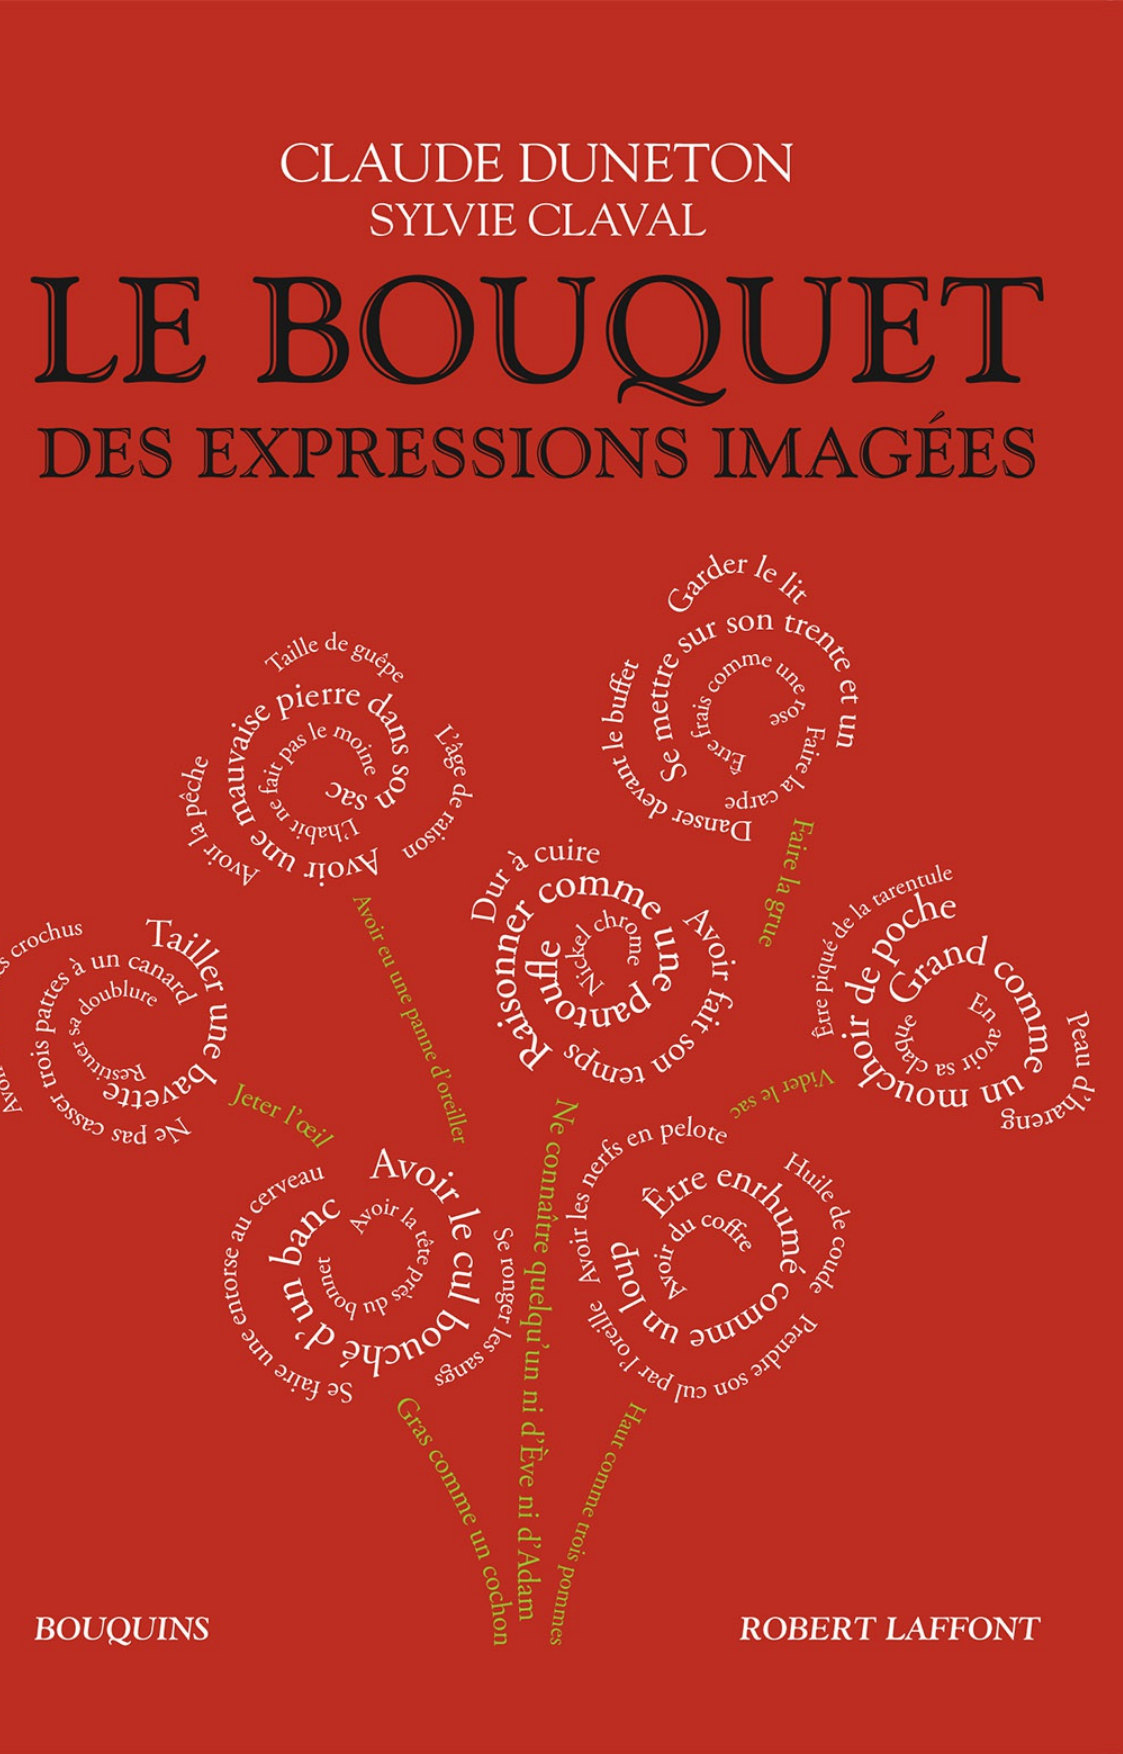 Le Bouquet Des Expressions Imagees Robert Laffont 2016 This palletizer is able to process a large variety of boxes and crates. le bouquet des expressions imagees